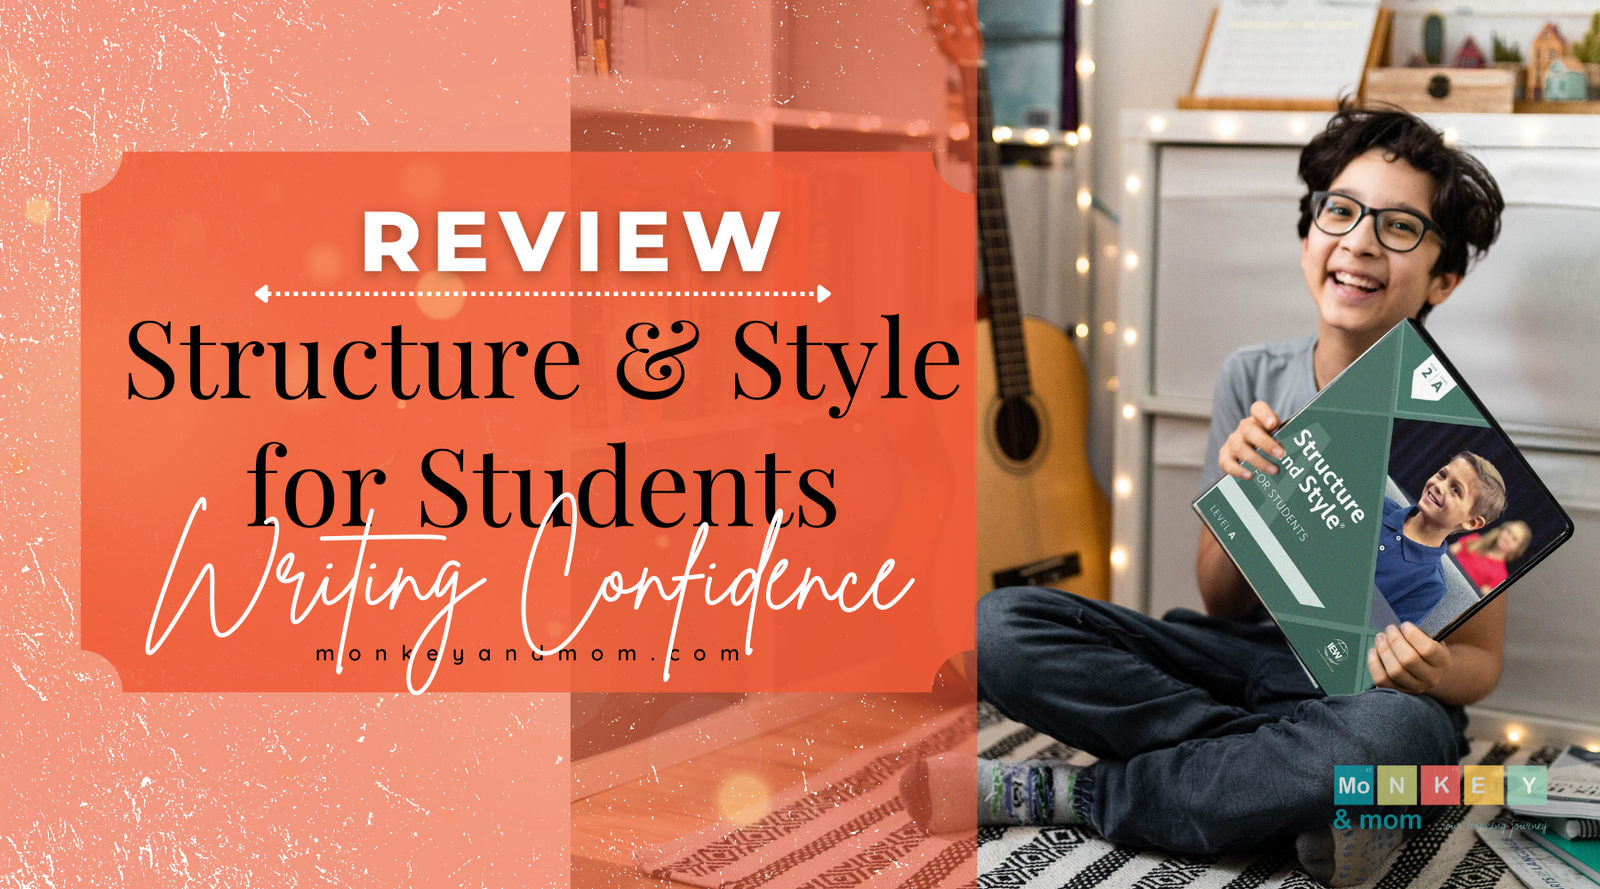 An IEW Structure and Style for Students Review – From Doubt to Confidence (VI)